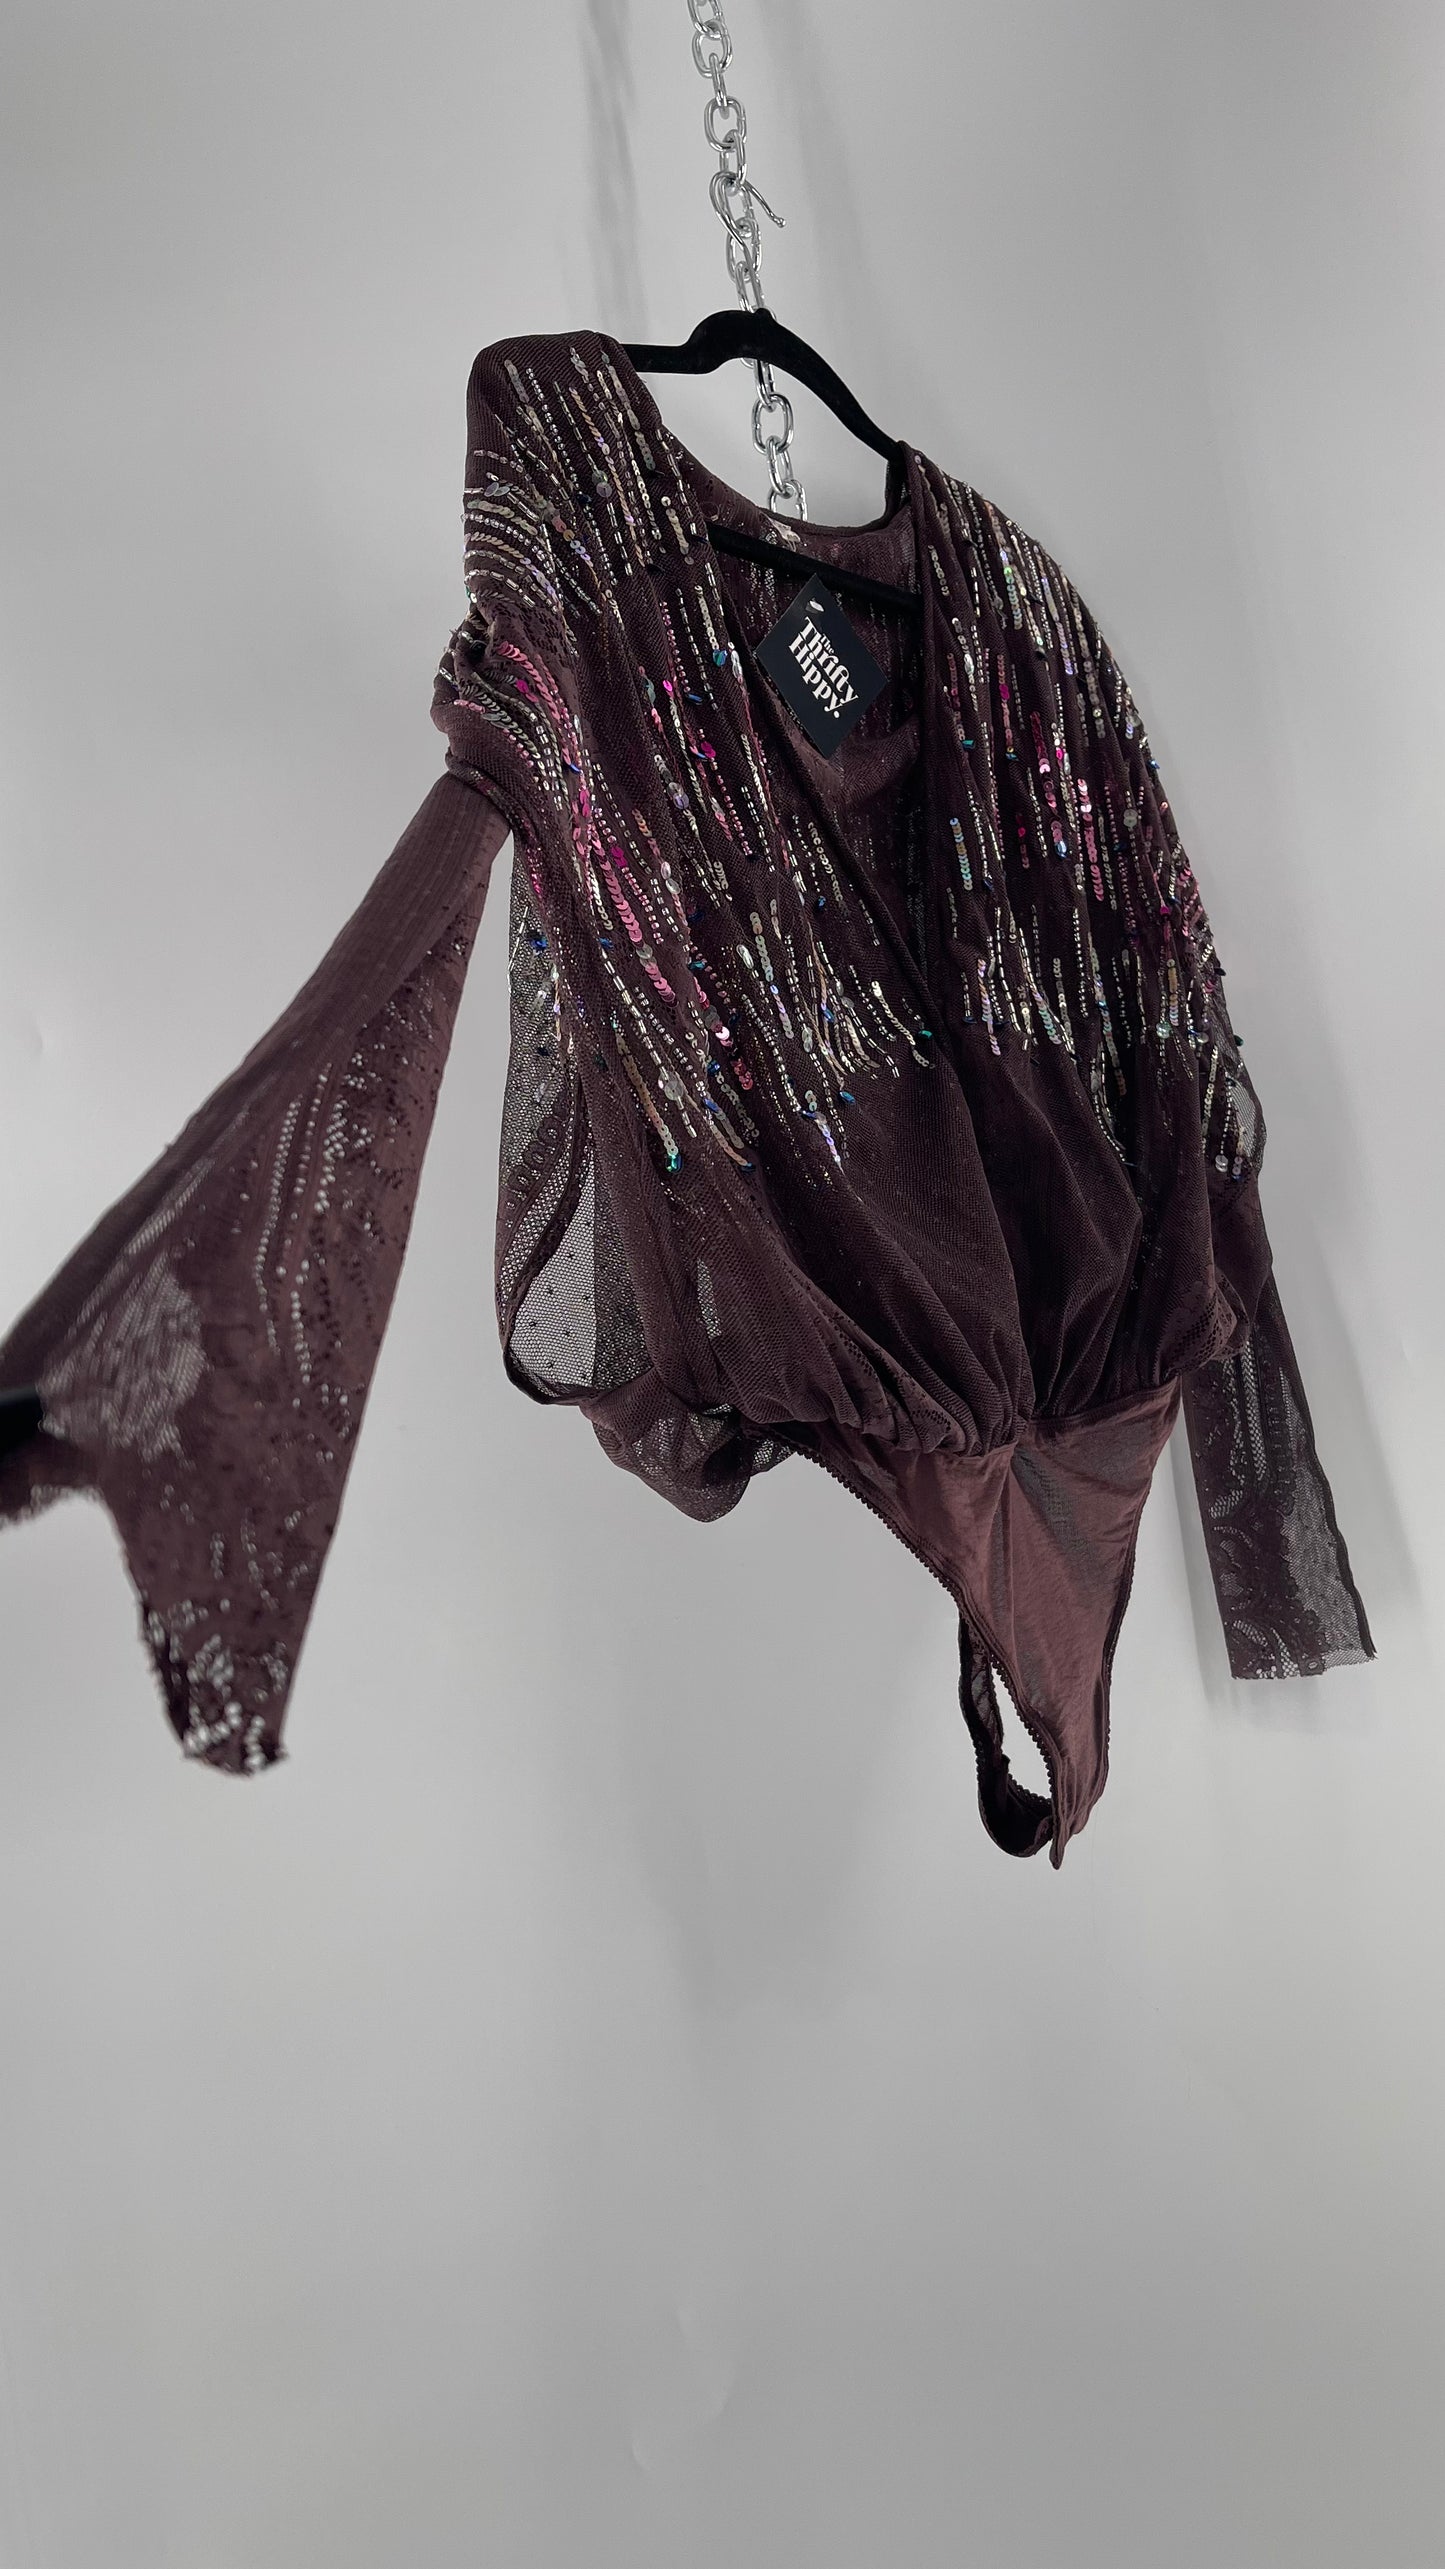 Intimately Free People Plum Mesh Bodysuit with Lace Sleeves and Beaded/Sequined/Embellished Body (Medium)